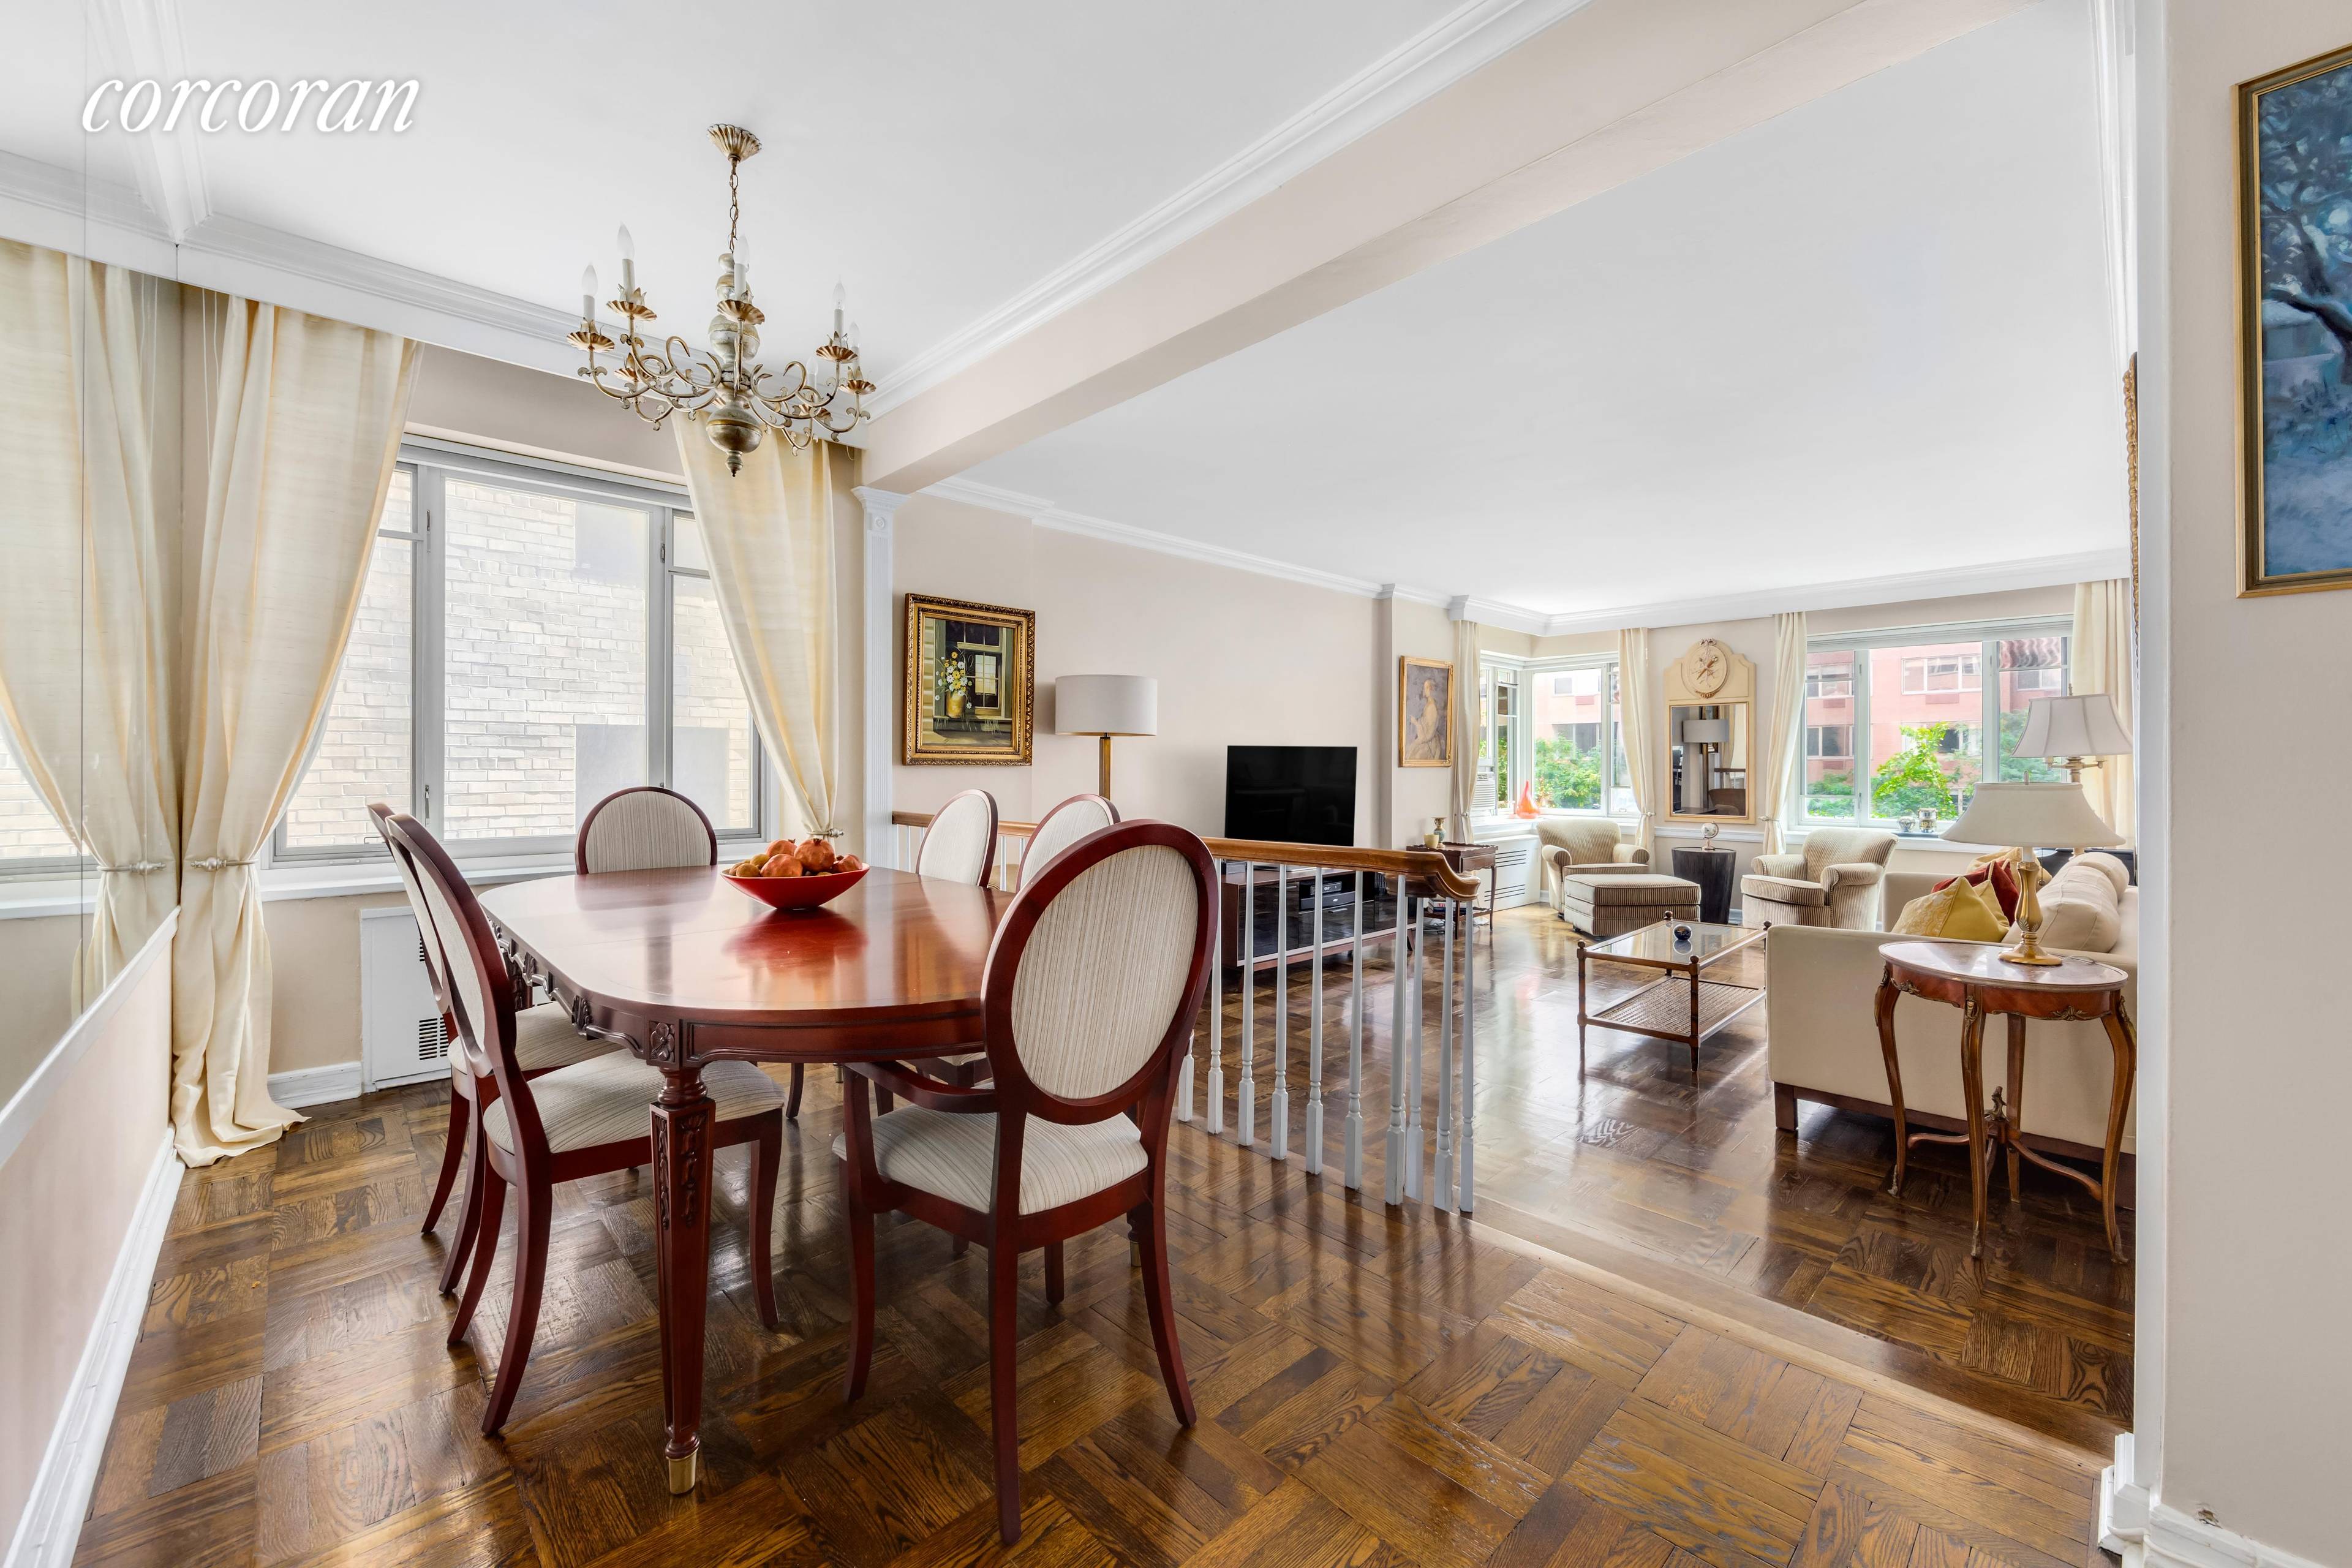 Welcome to a generously proportioned, fully renovated 2 bedroom, 2 bathroom home in the heart of historic Sutton Place.